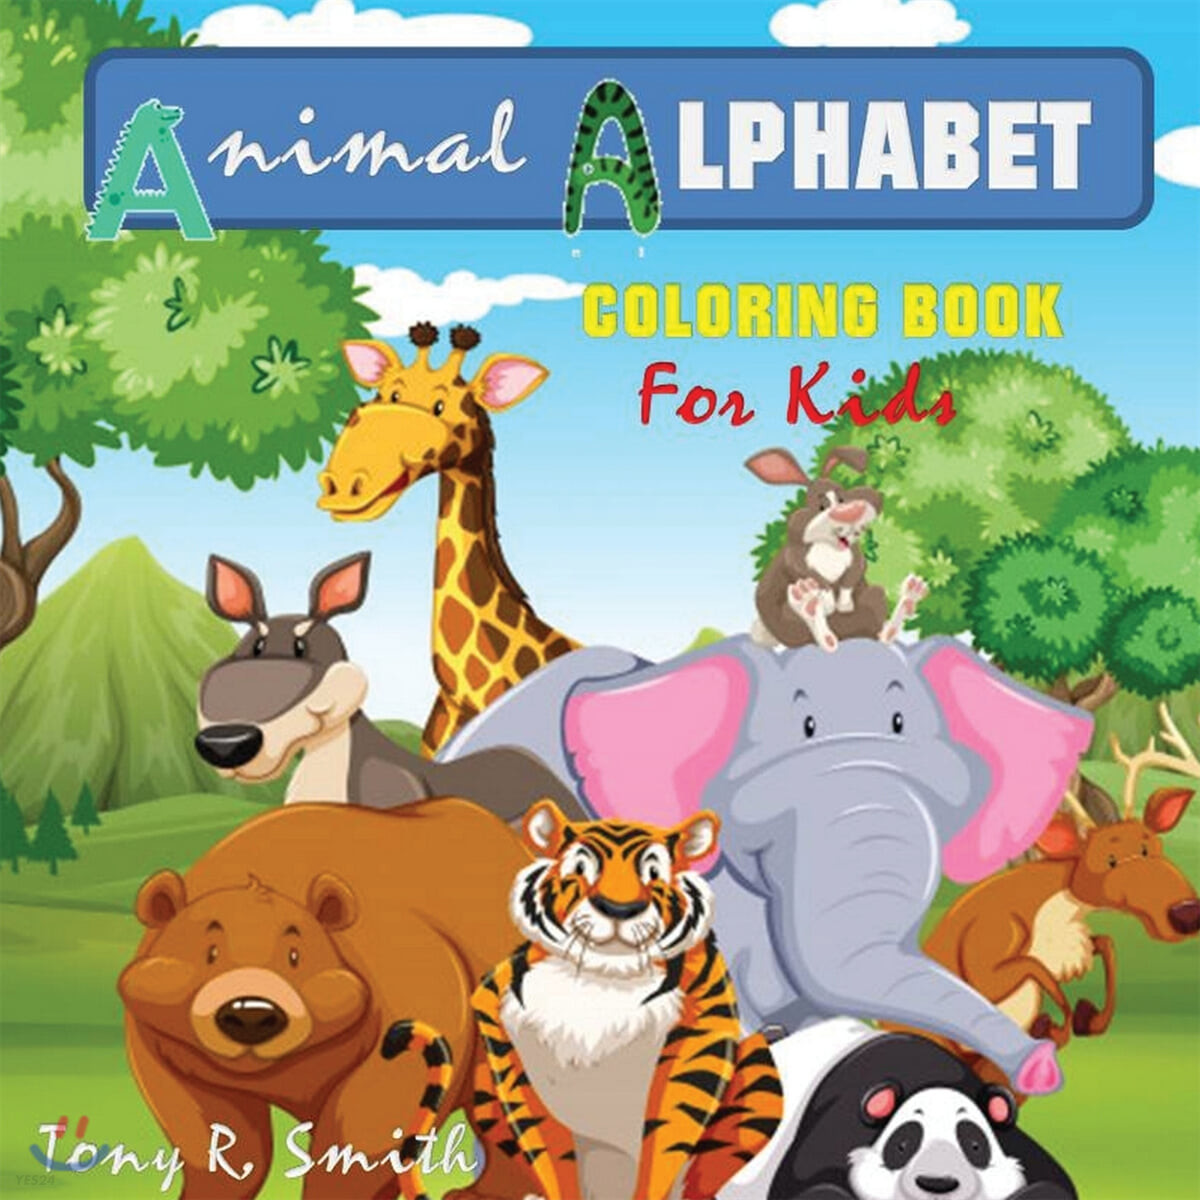 Animal Alphabet Coloring Book for kids